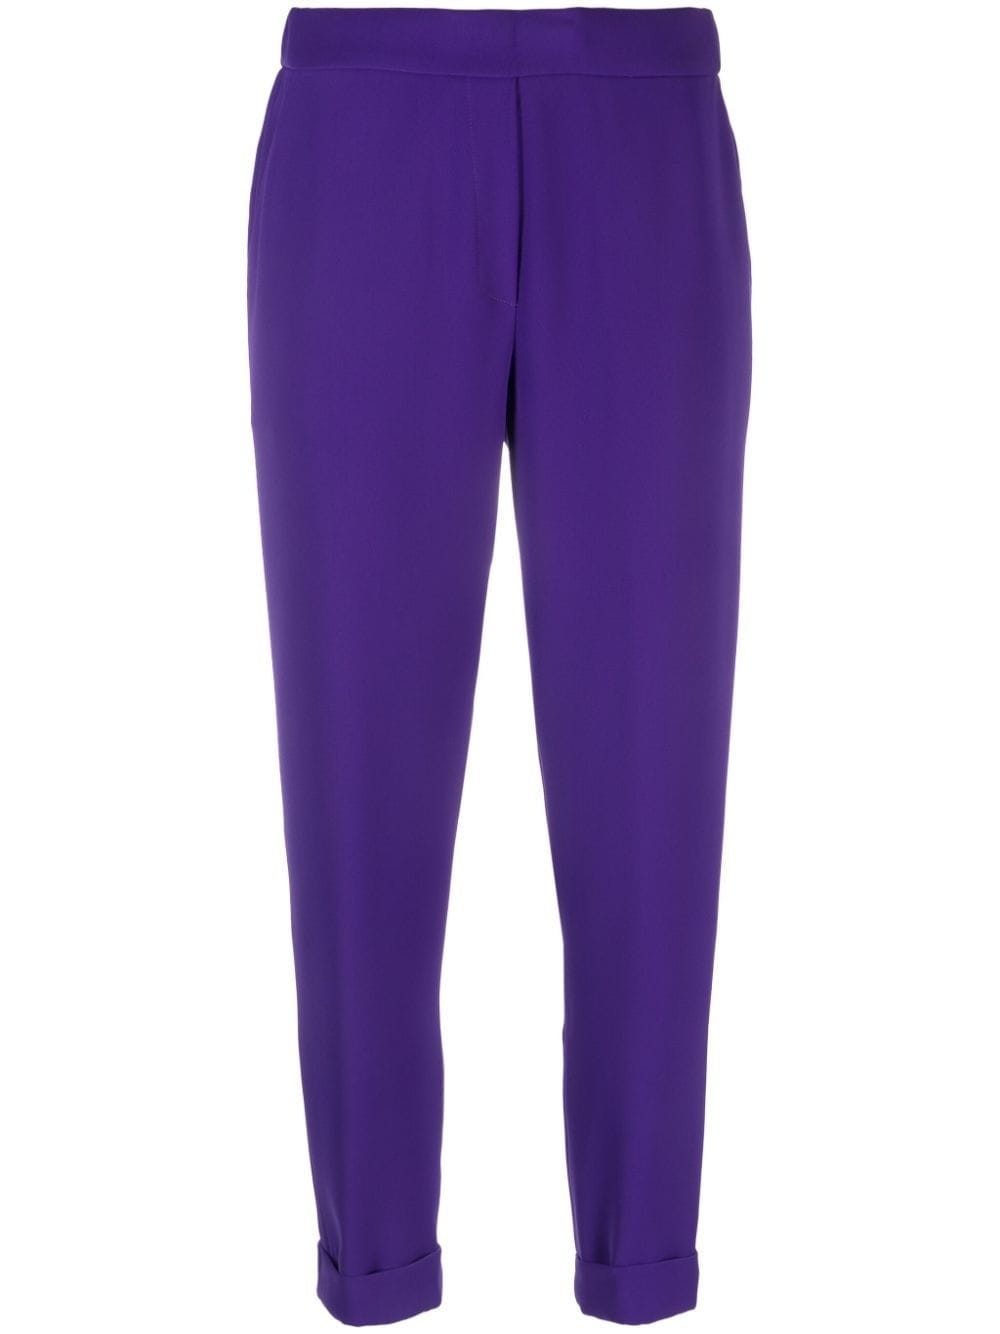 P.A.R.O.S.H HIGH-WAISTED TAPERED TROUSERS